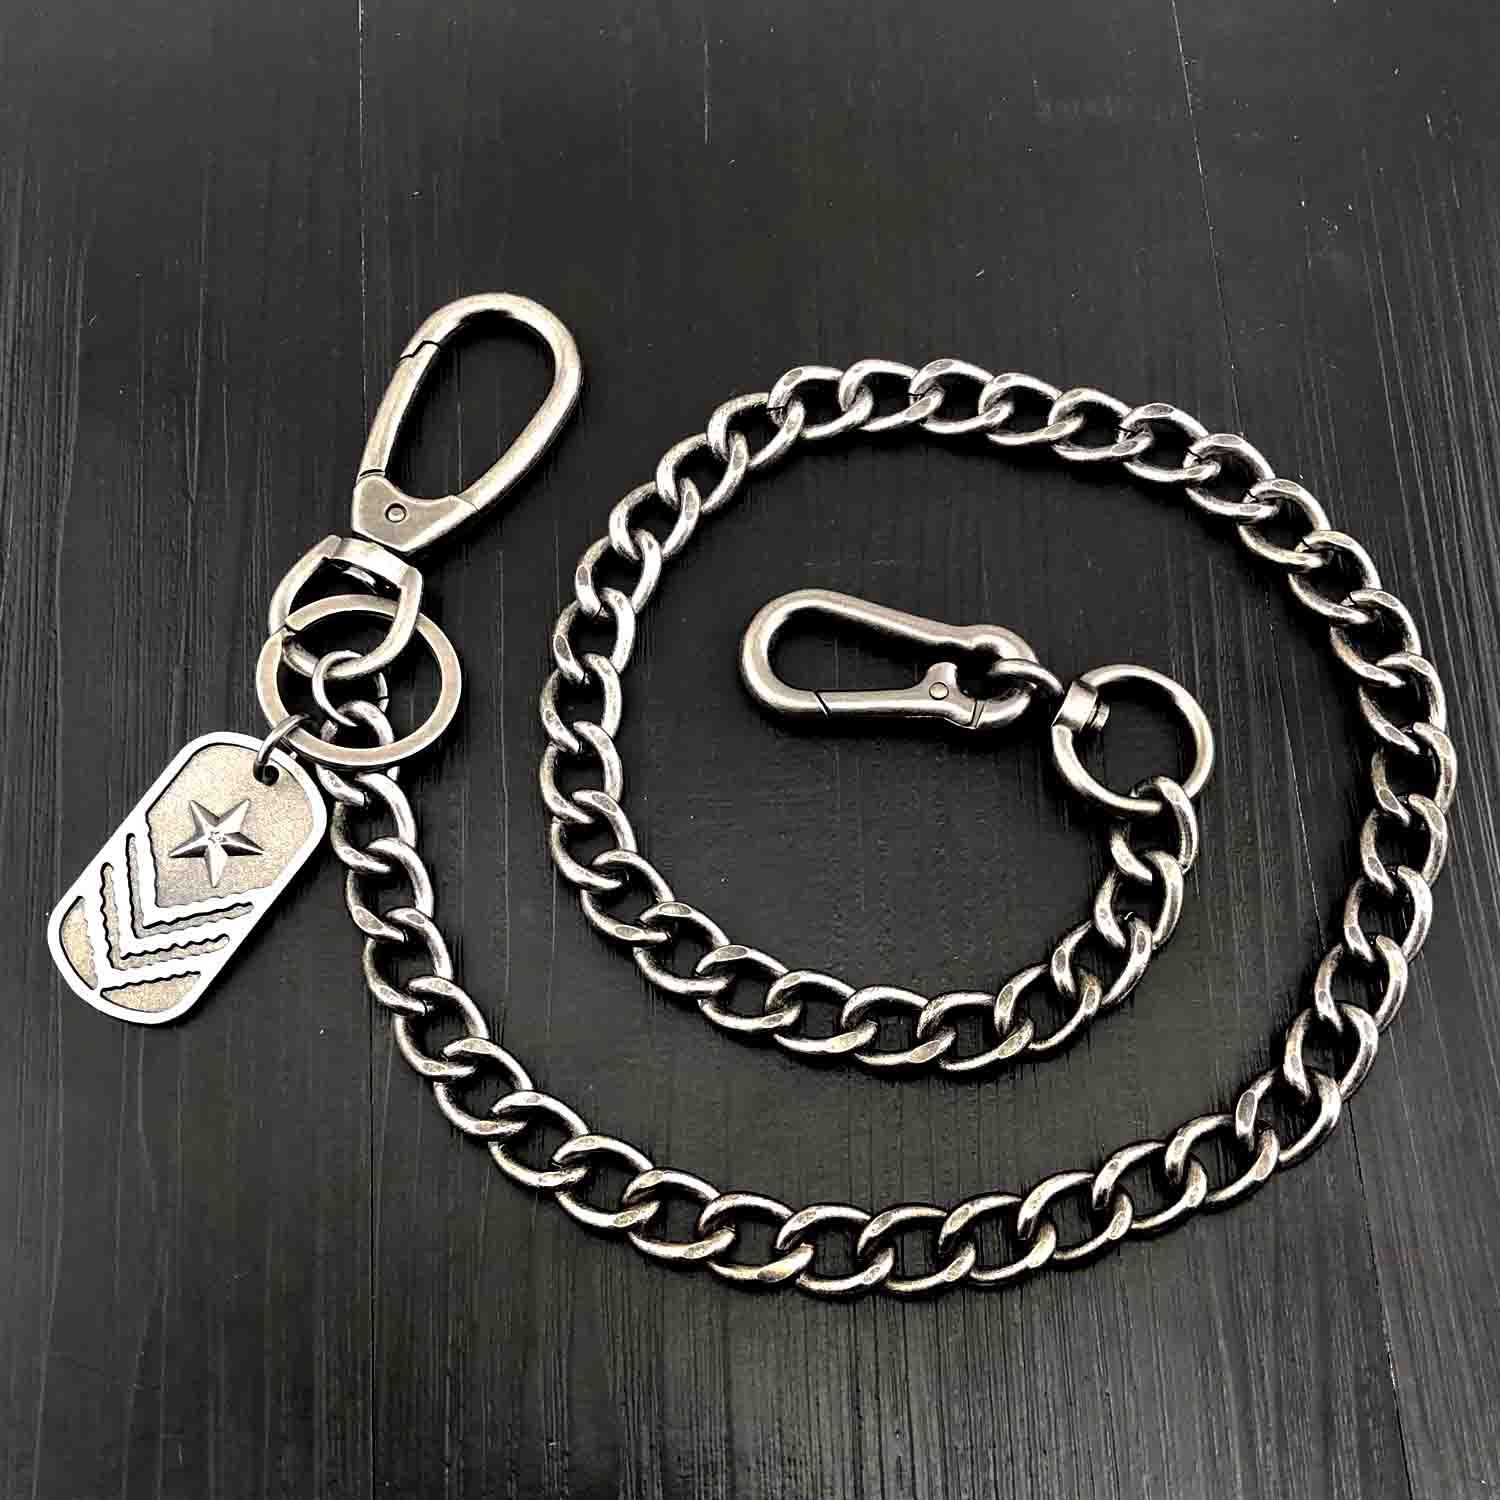 Cool Silver Tag Long Mens Pants Chain Military Tag Wallet Chain